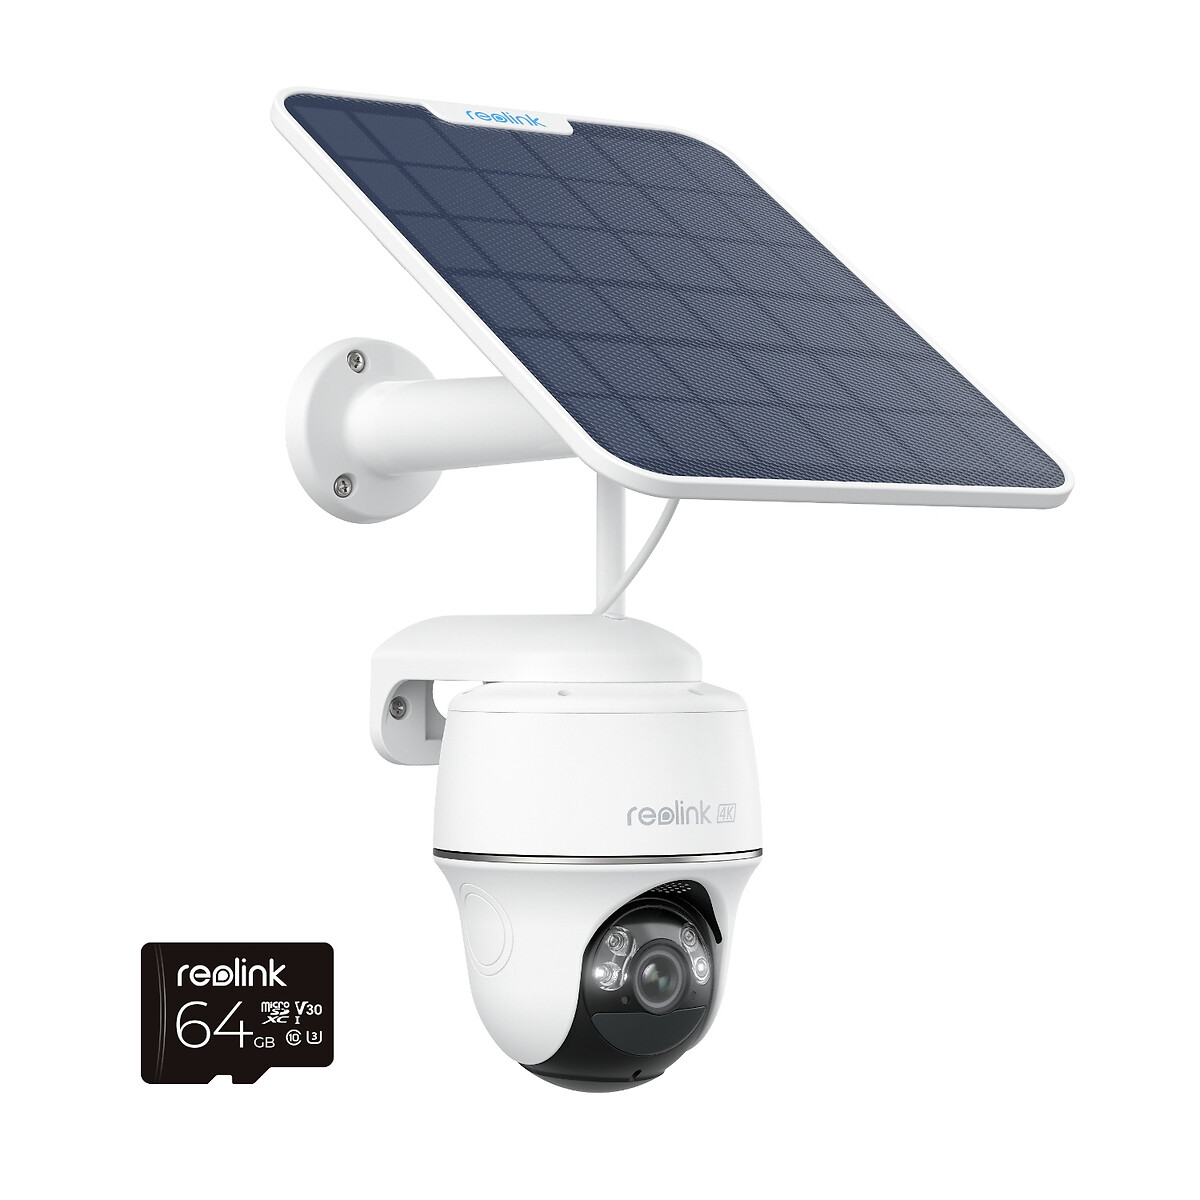 4k ultra hd wire-free argus pan tilt camera with solar panel 2 and 64gb,  white, Reolink | La Redoute